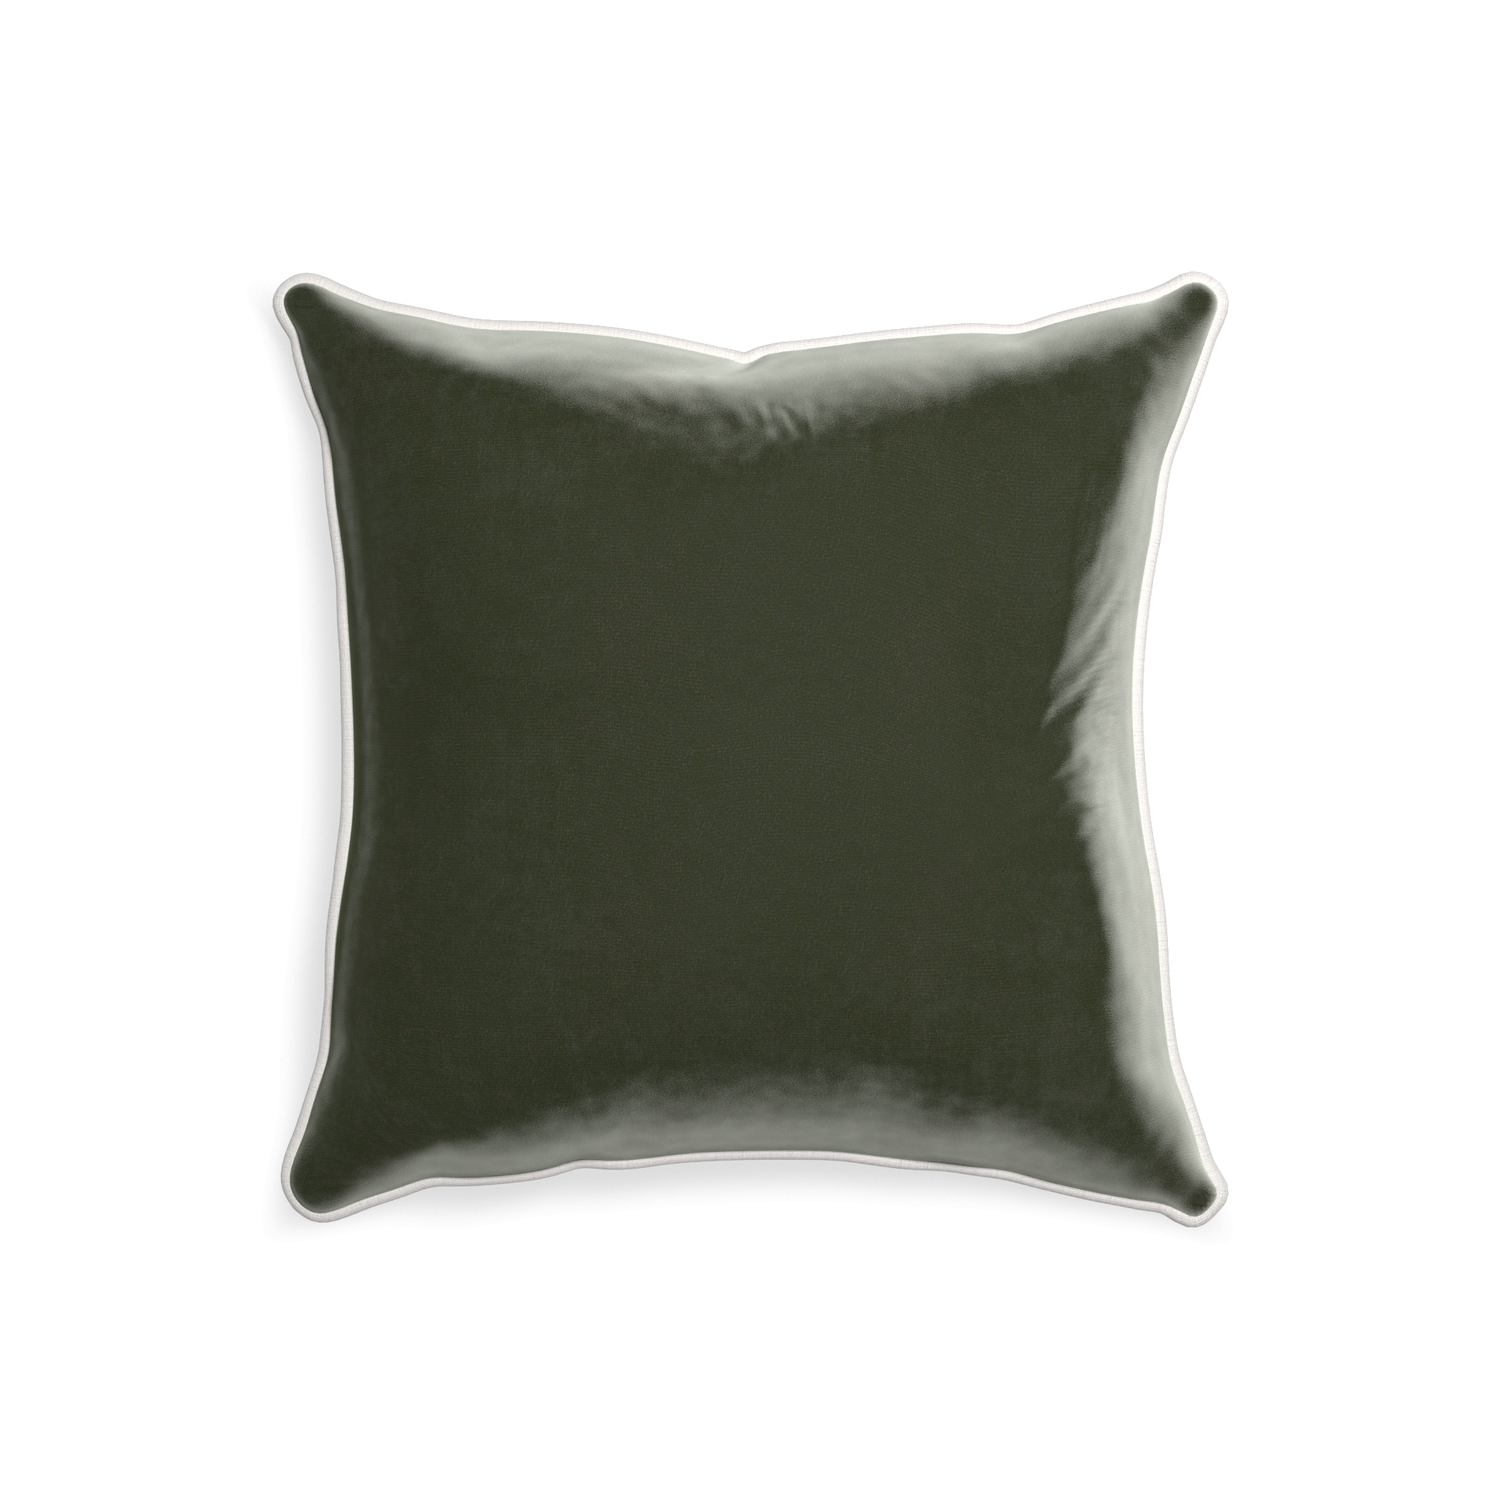 20-square fern velvet custom fern greenpillow with snow piping on white background